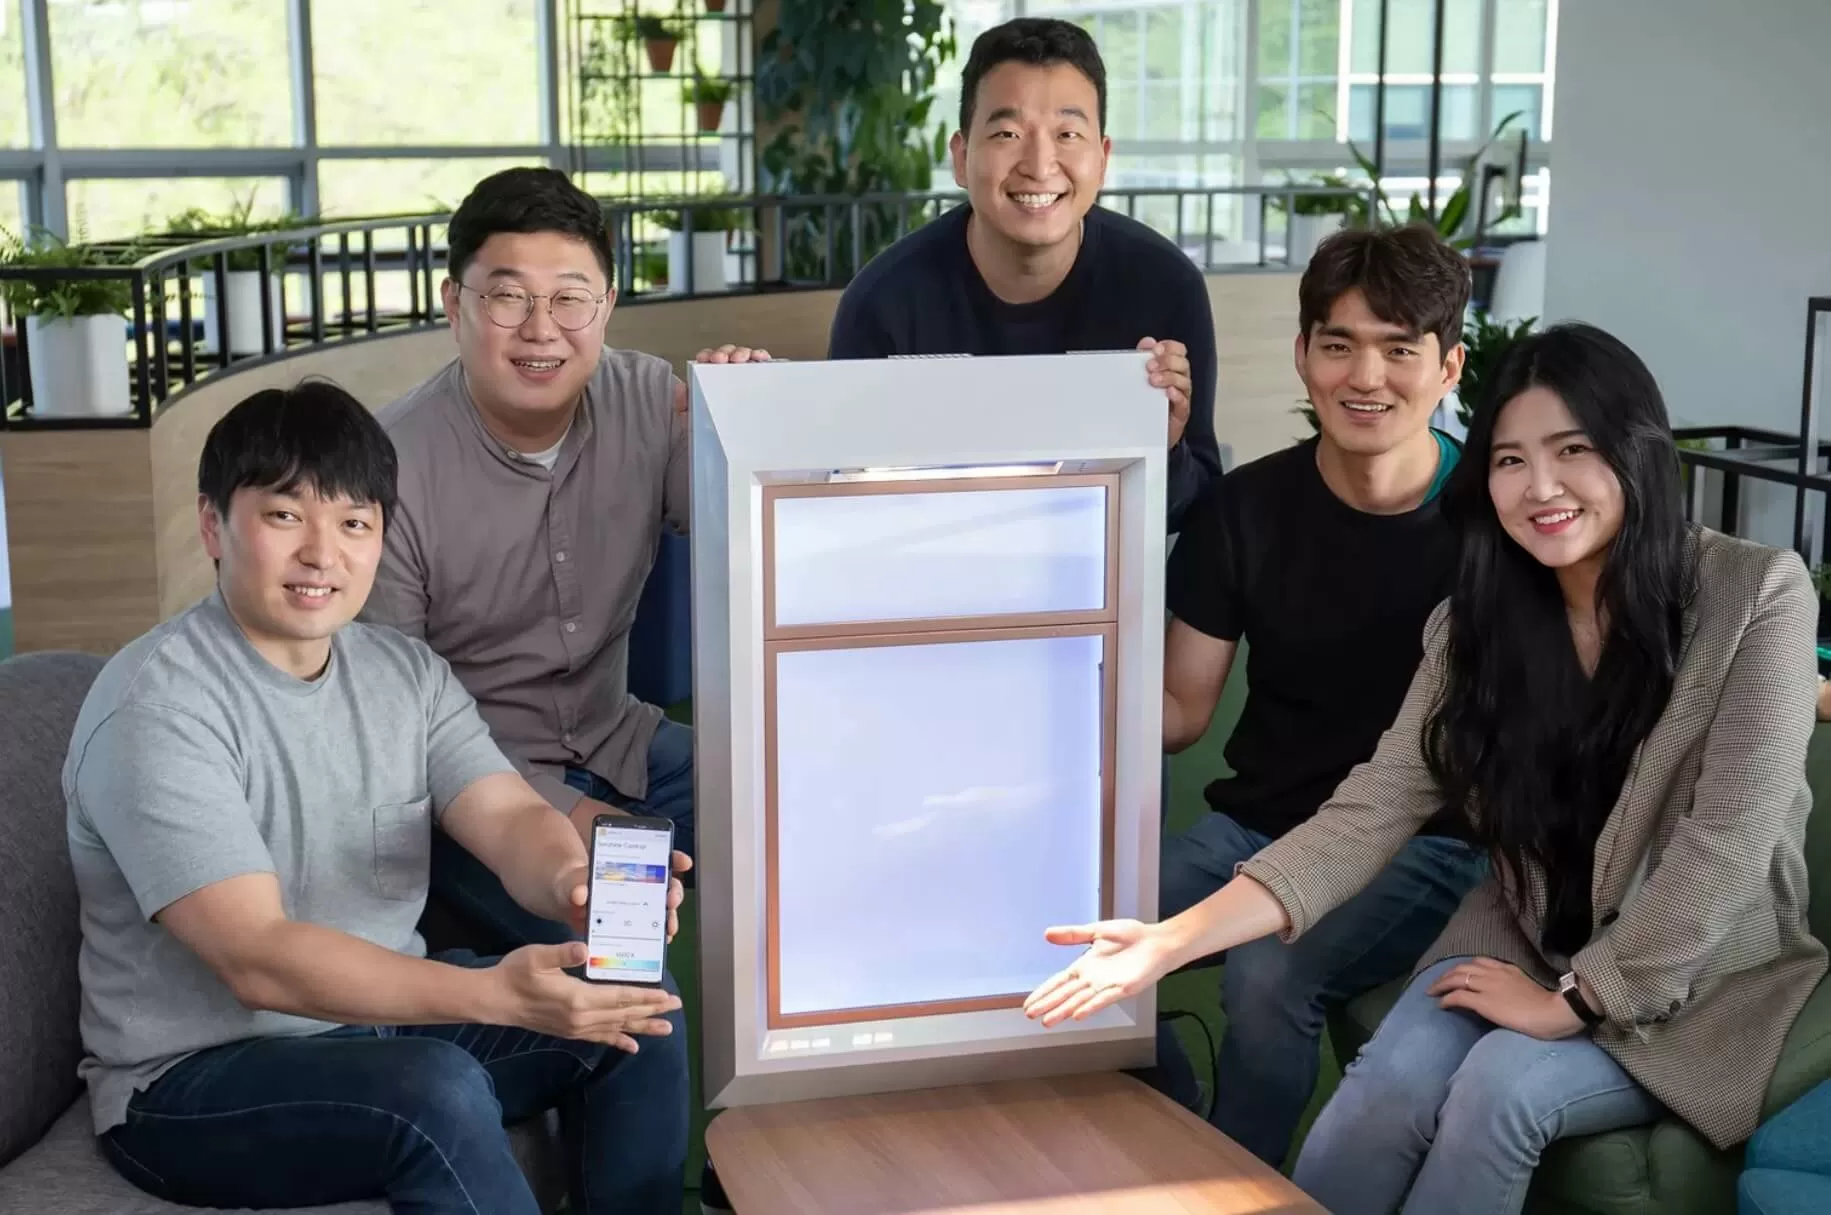 This Samsung spin-off makes fake windows that create artificial sunlight